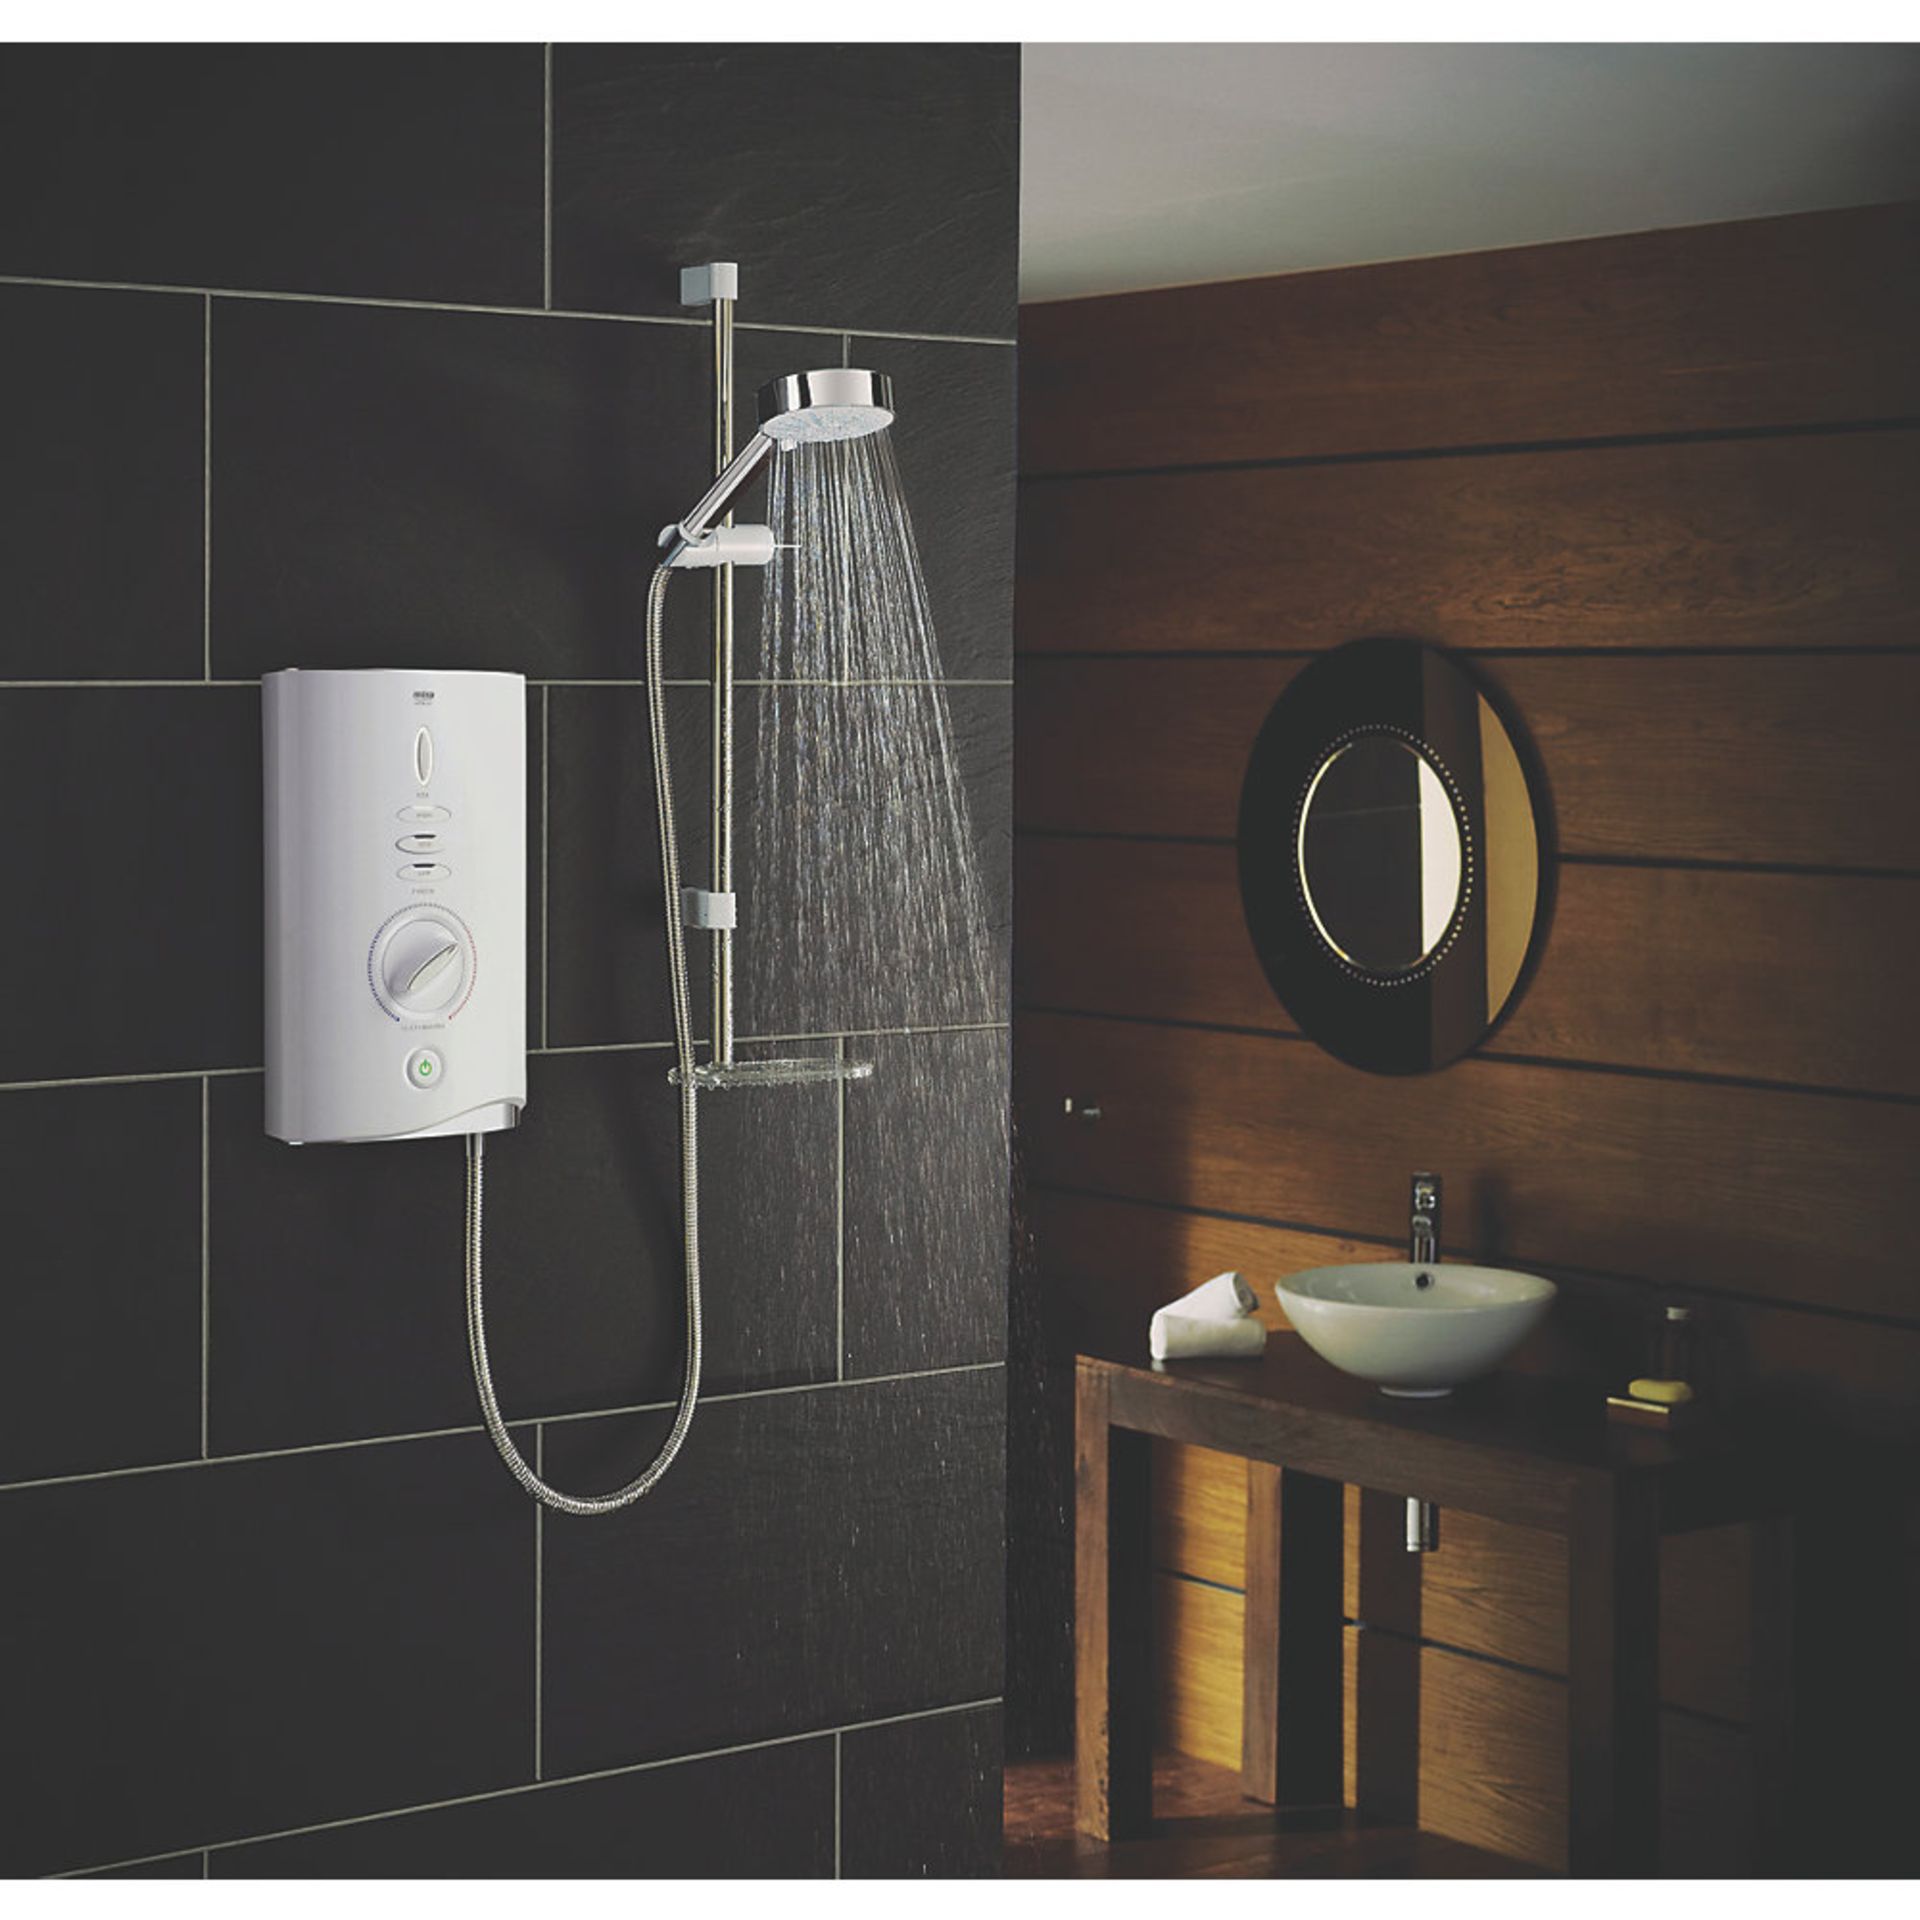 (QP12) Mira Sport Max with Airboost (10.8kW). RRP £459.16. A world first for electric showers.... (